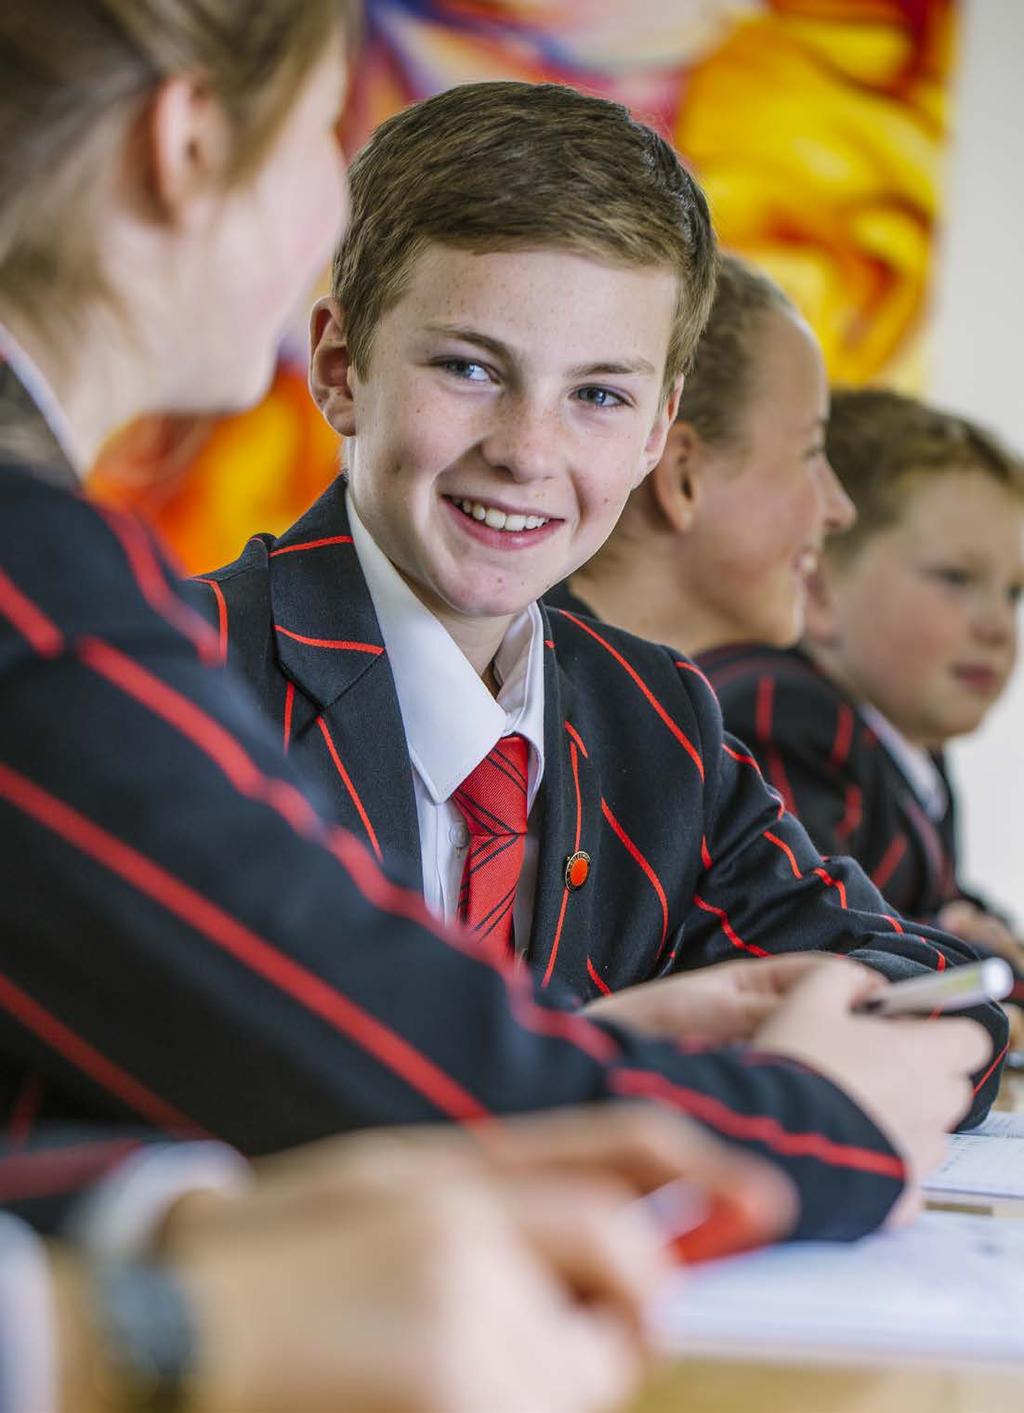 5 All-Rounder Scholarships Giggleswick offers a breadth of opportunity in both academic and co-curricular activities.